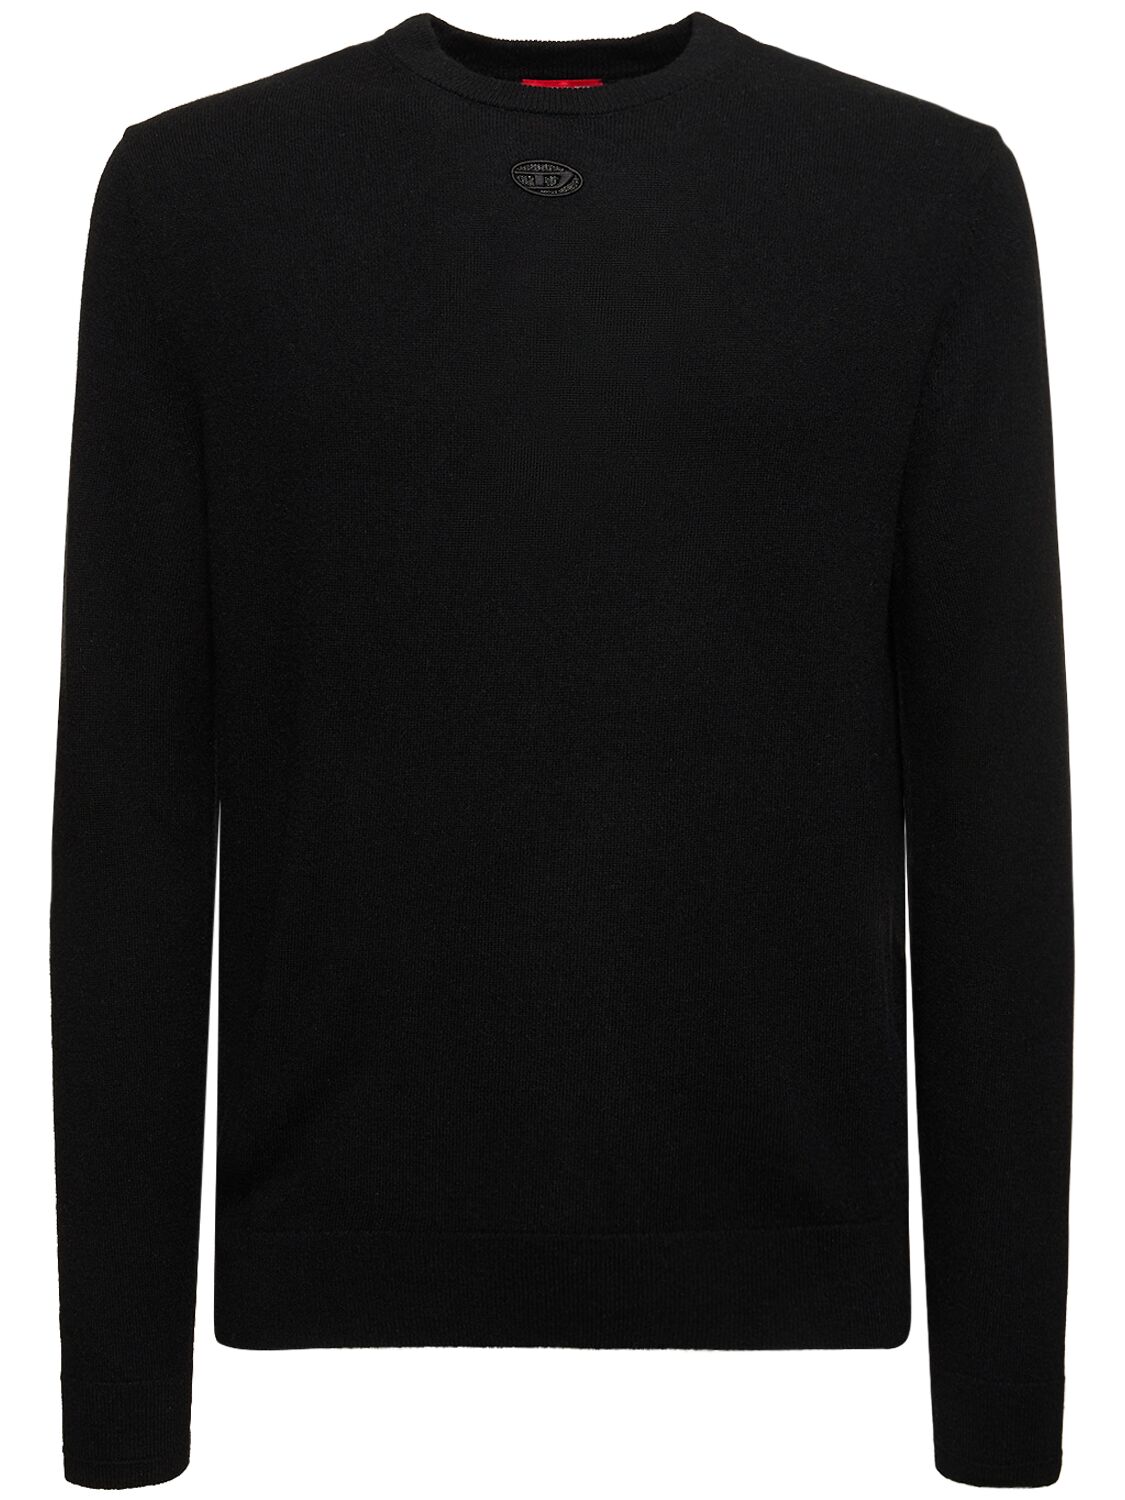 Oval-d Wool & Cashmere Knit Sweater